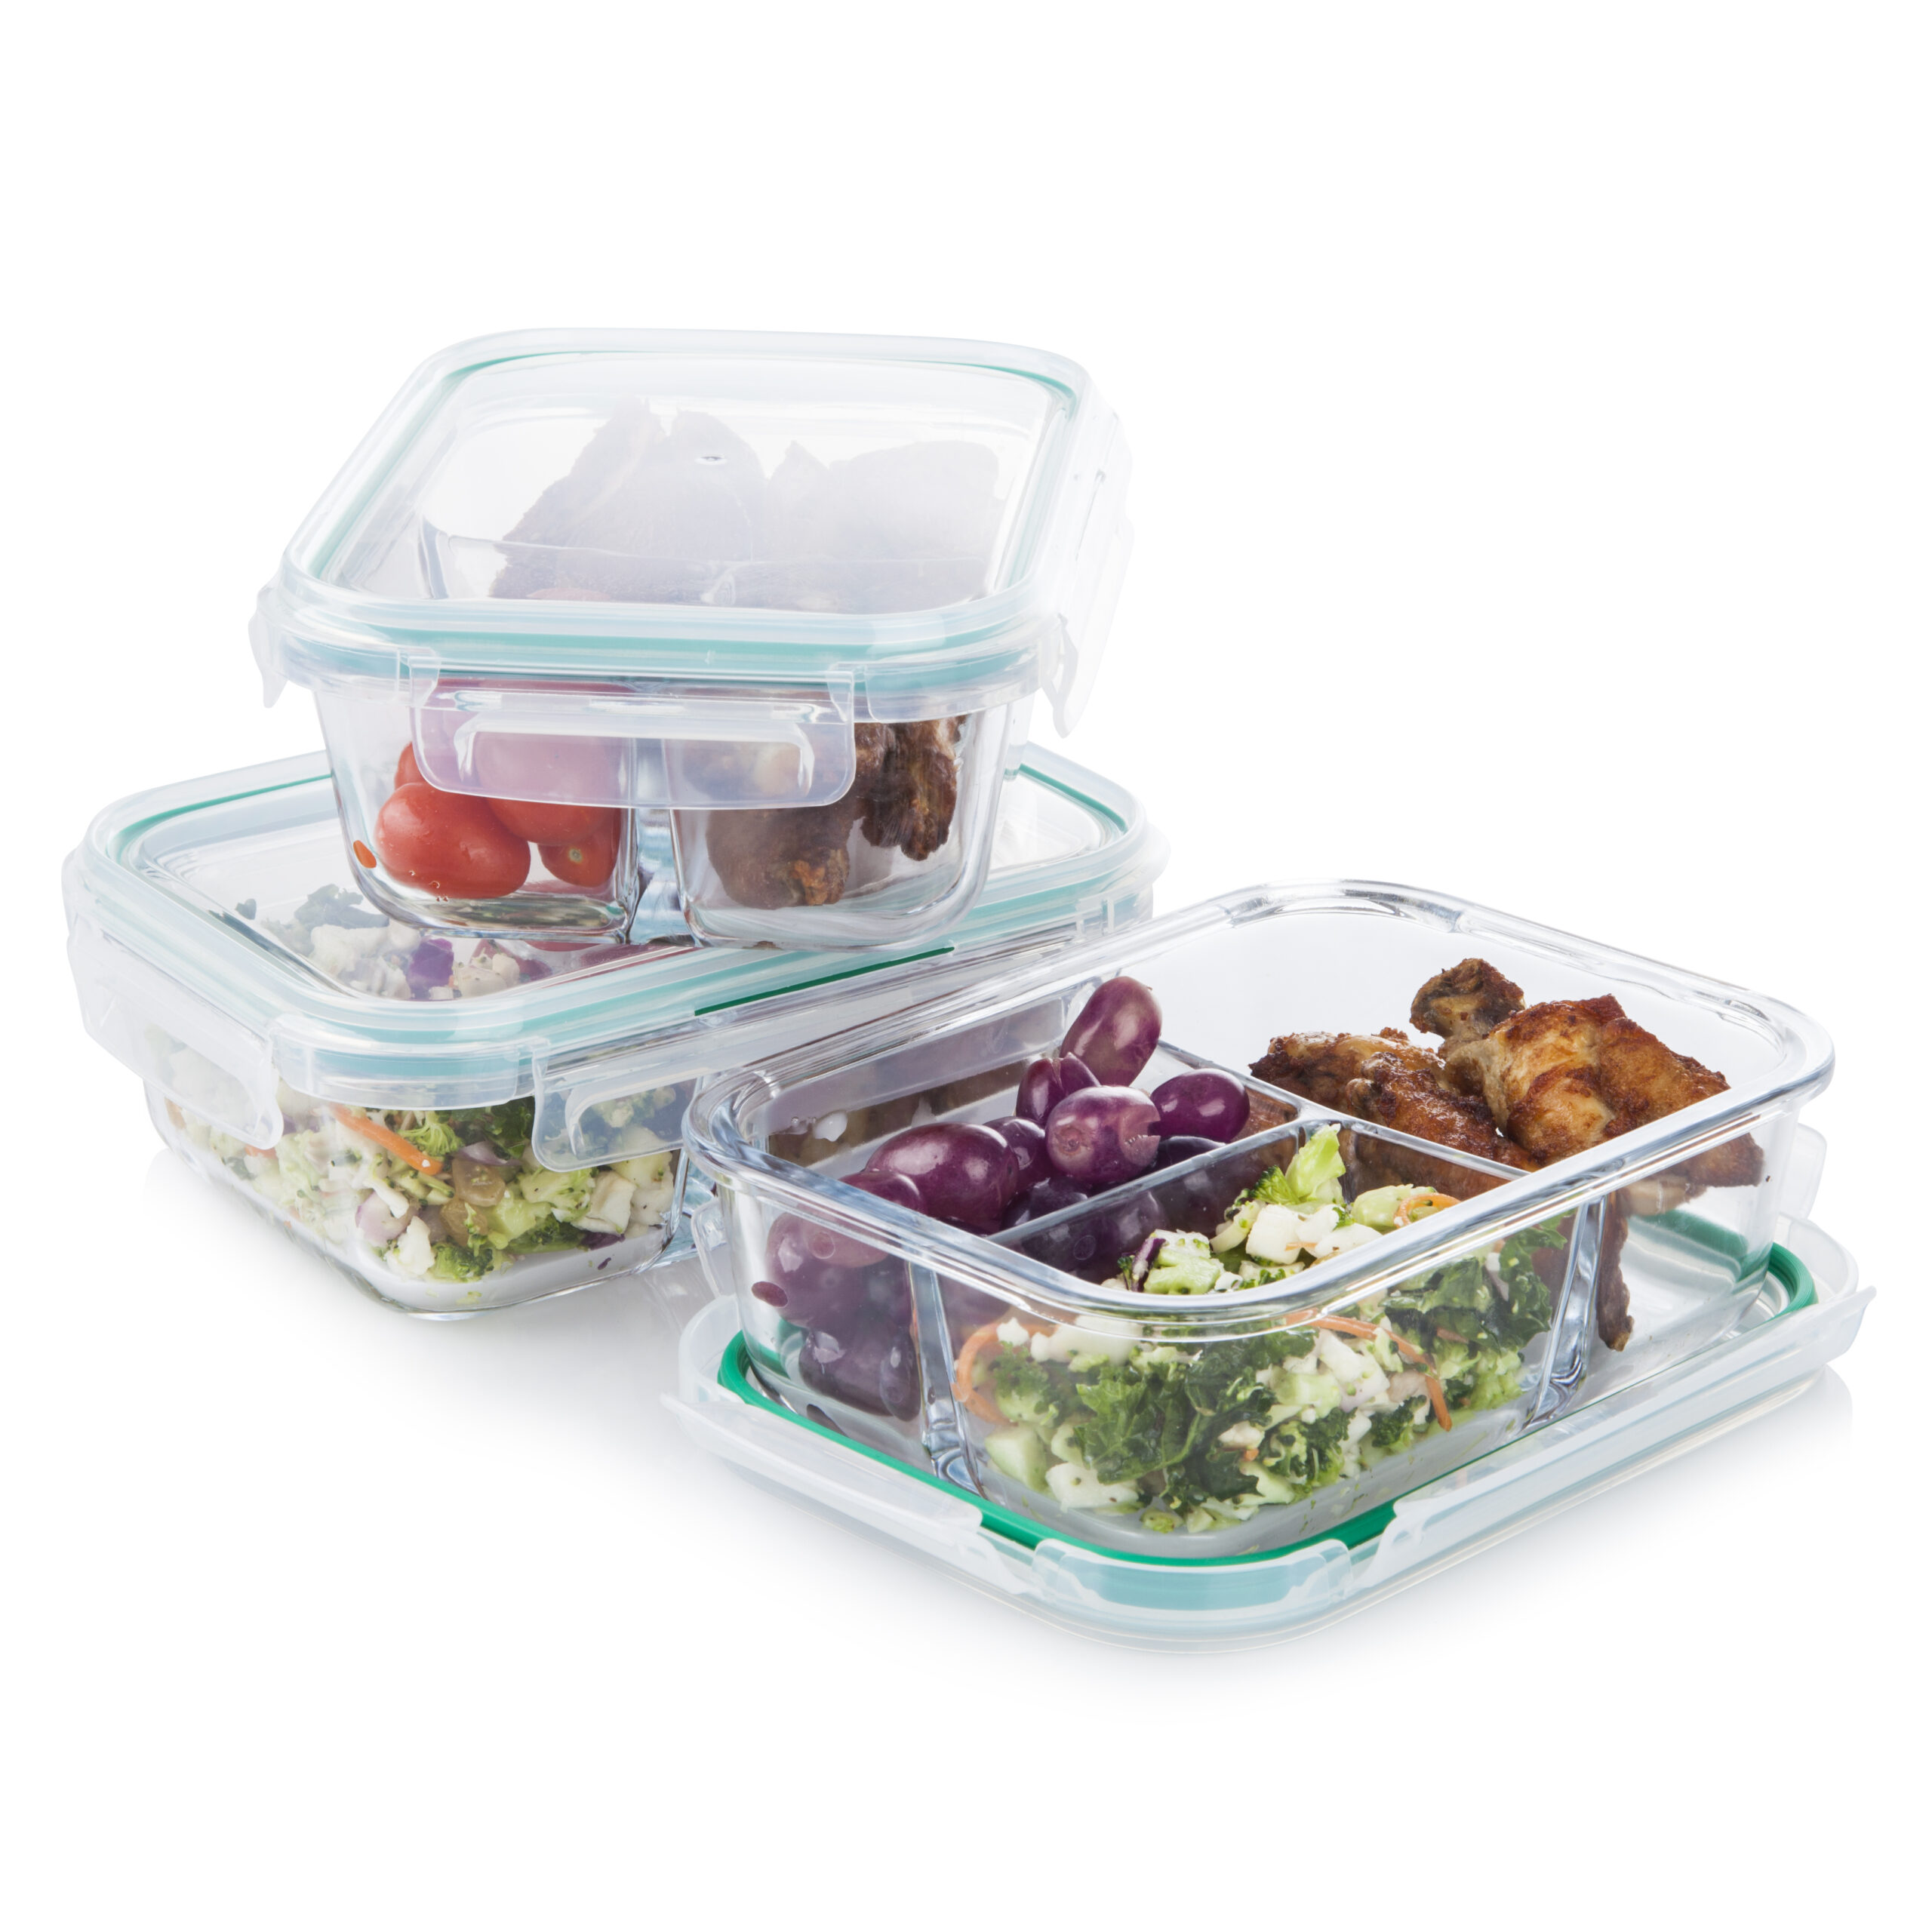 Clear glass food storage meal prepping containers with fresh berries, carrots, fruits, vegetables and meat on white background.